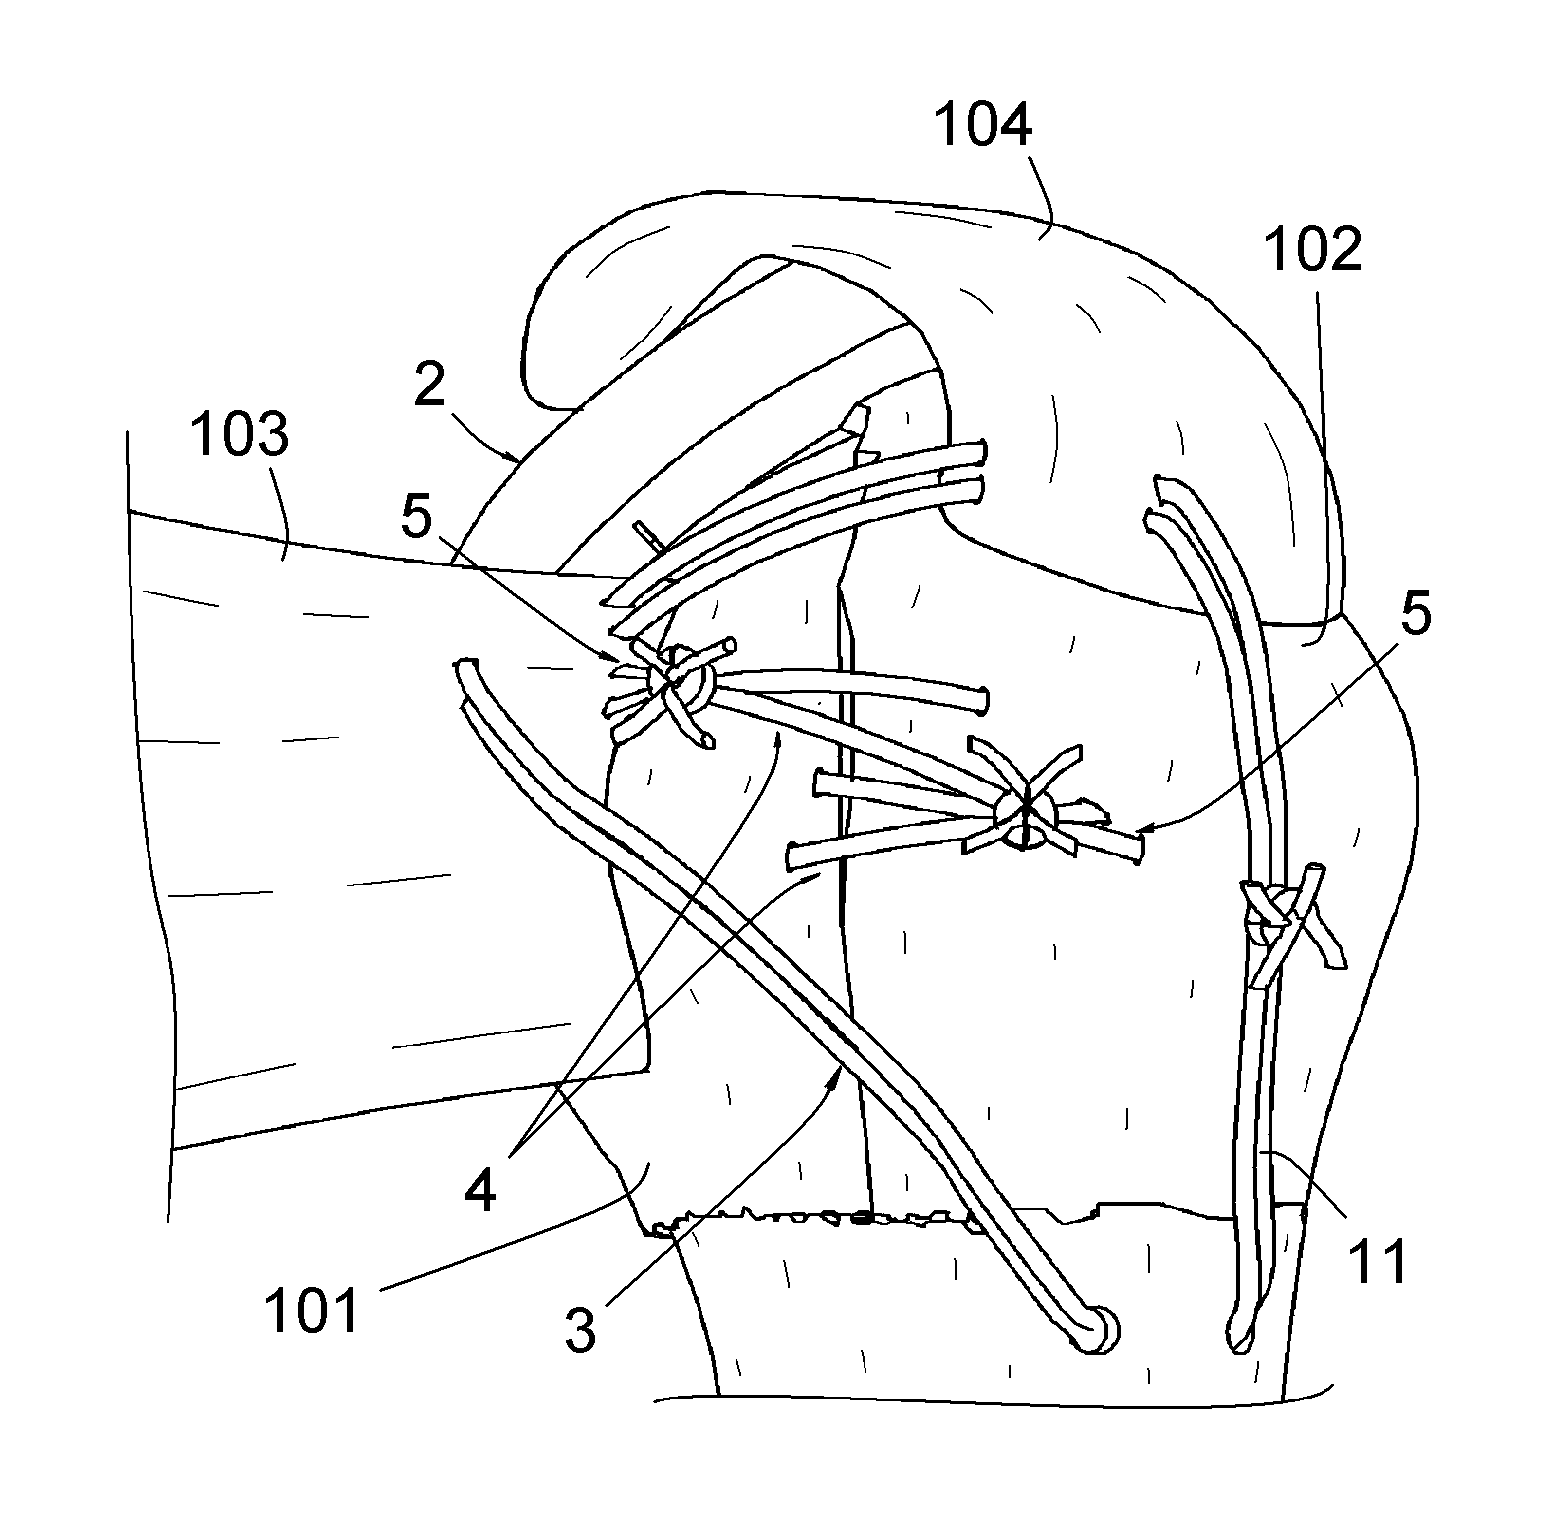 Surgical method for repairing a fractured shoulder joint